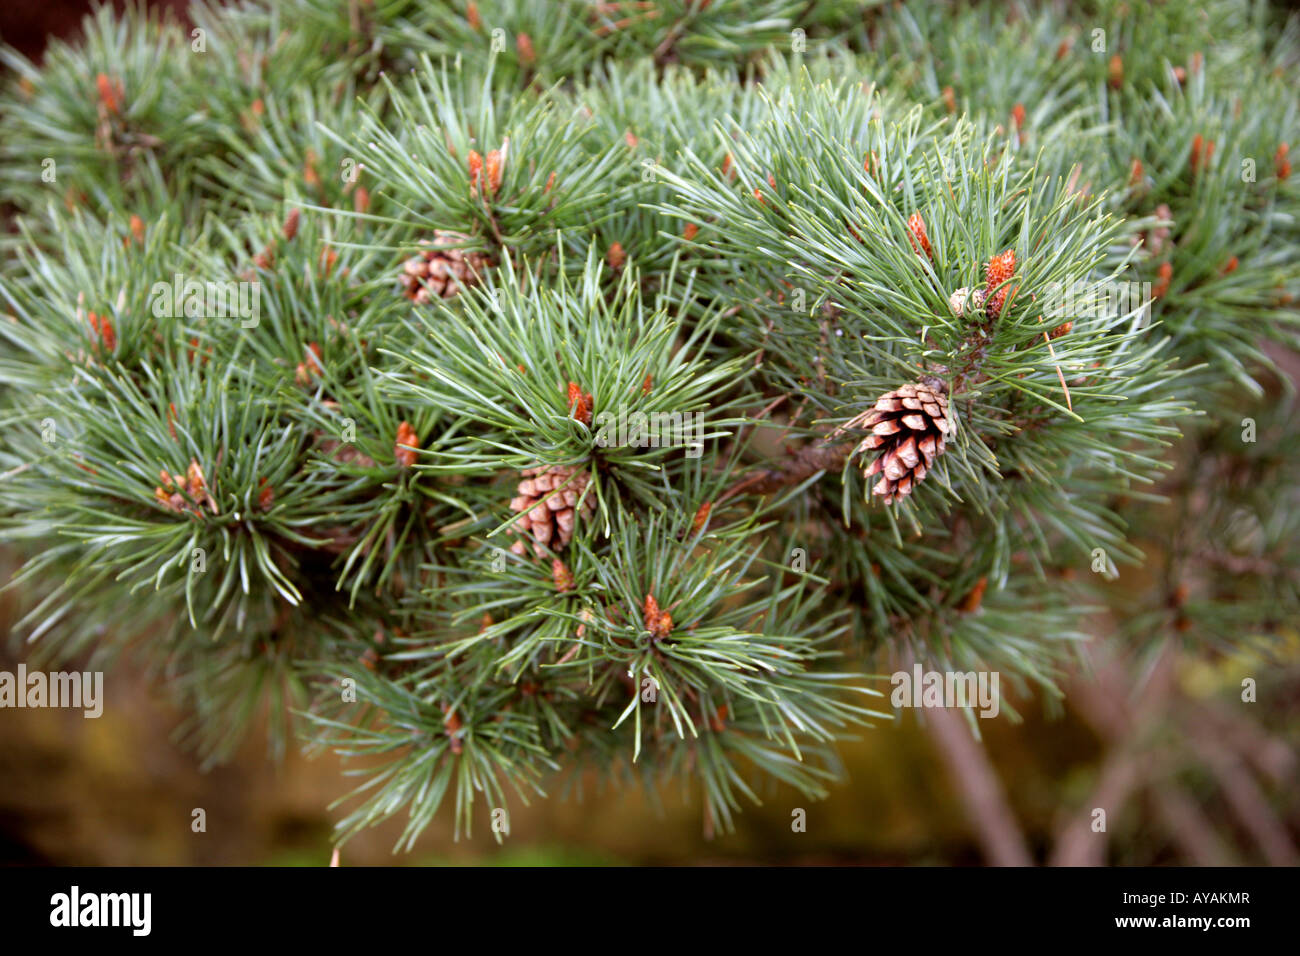 Scots Pine Pinus sylvestris 'Beuvronensis' Pinaceae. A species of Pine Tree Native to Europe and Asia Stock Photo